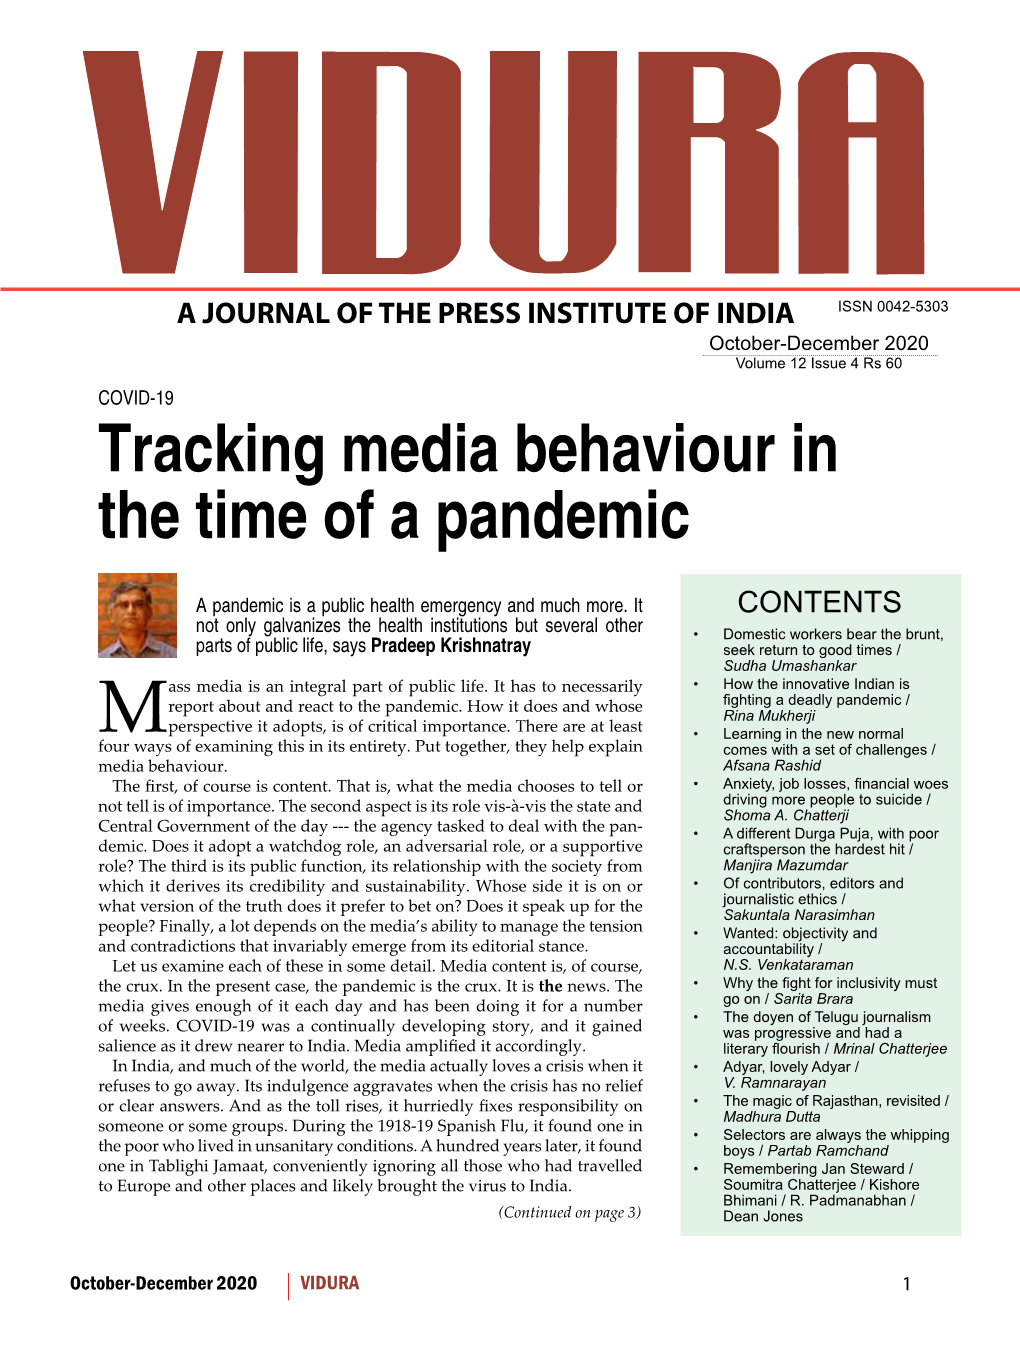 Tracking Media Behaviour in the Time of a Pandemic